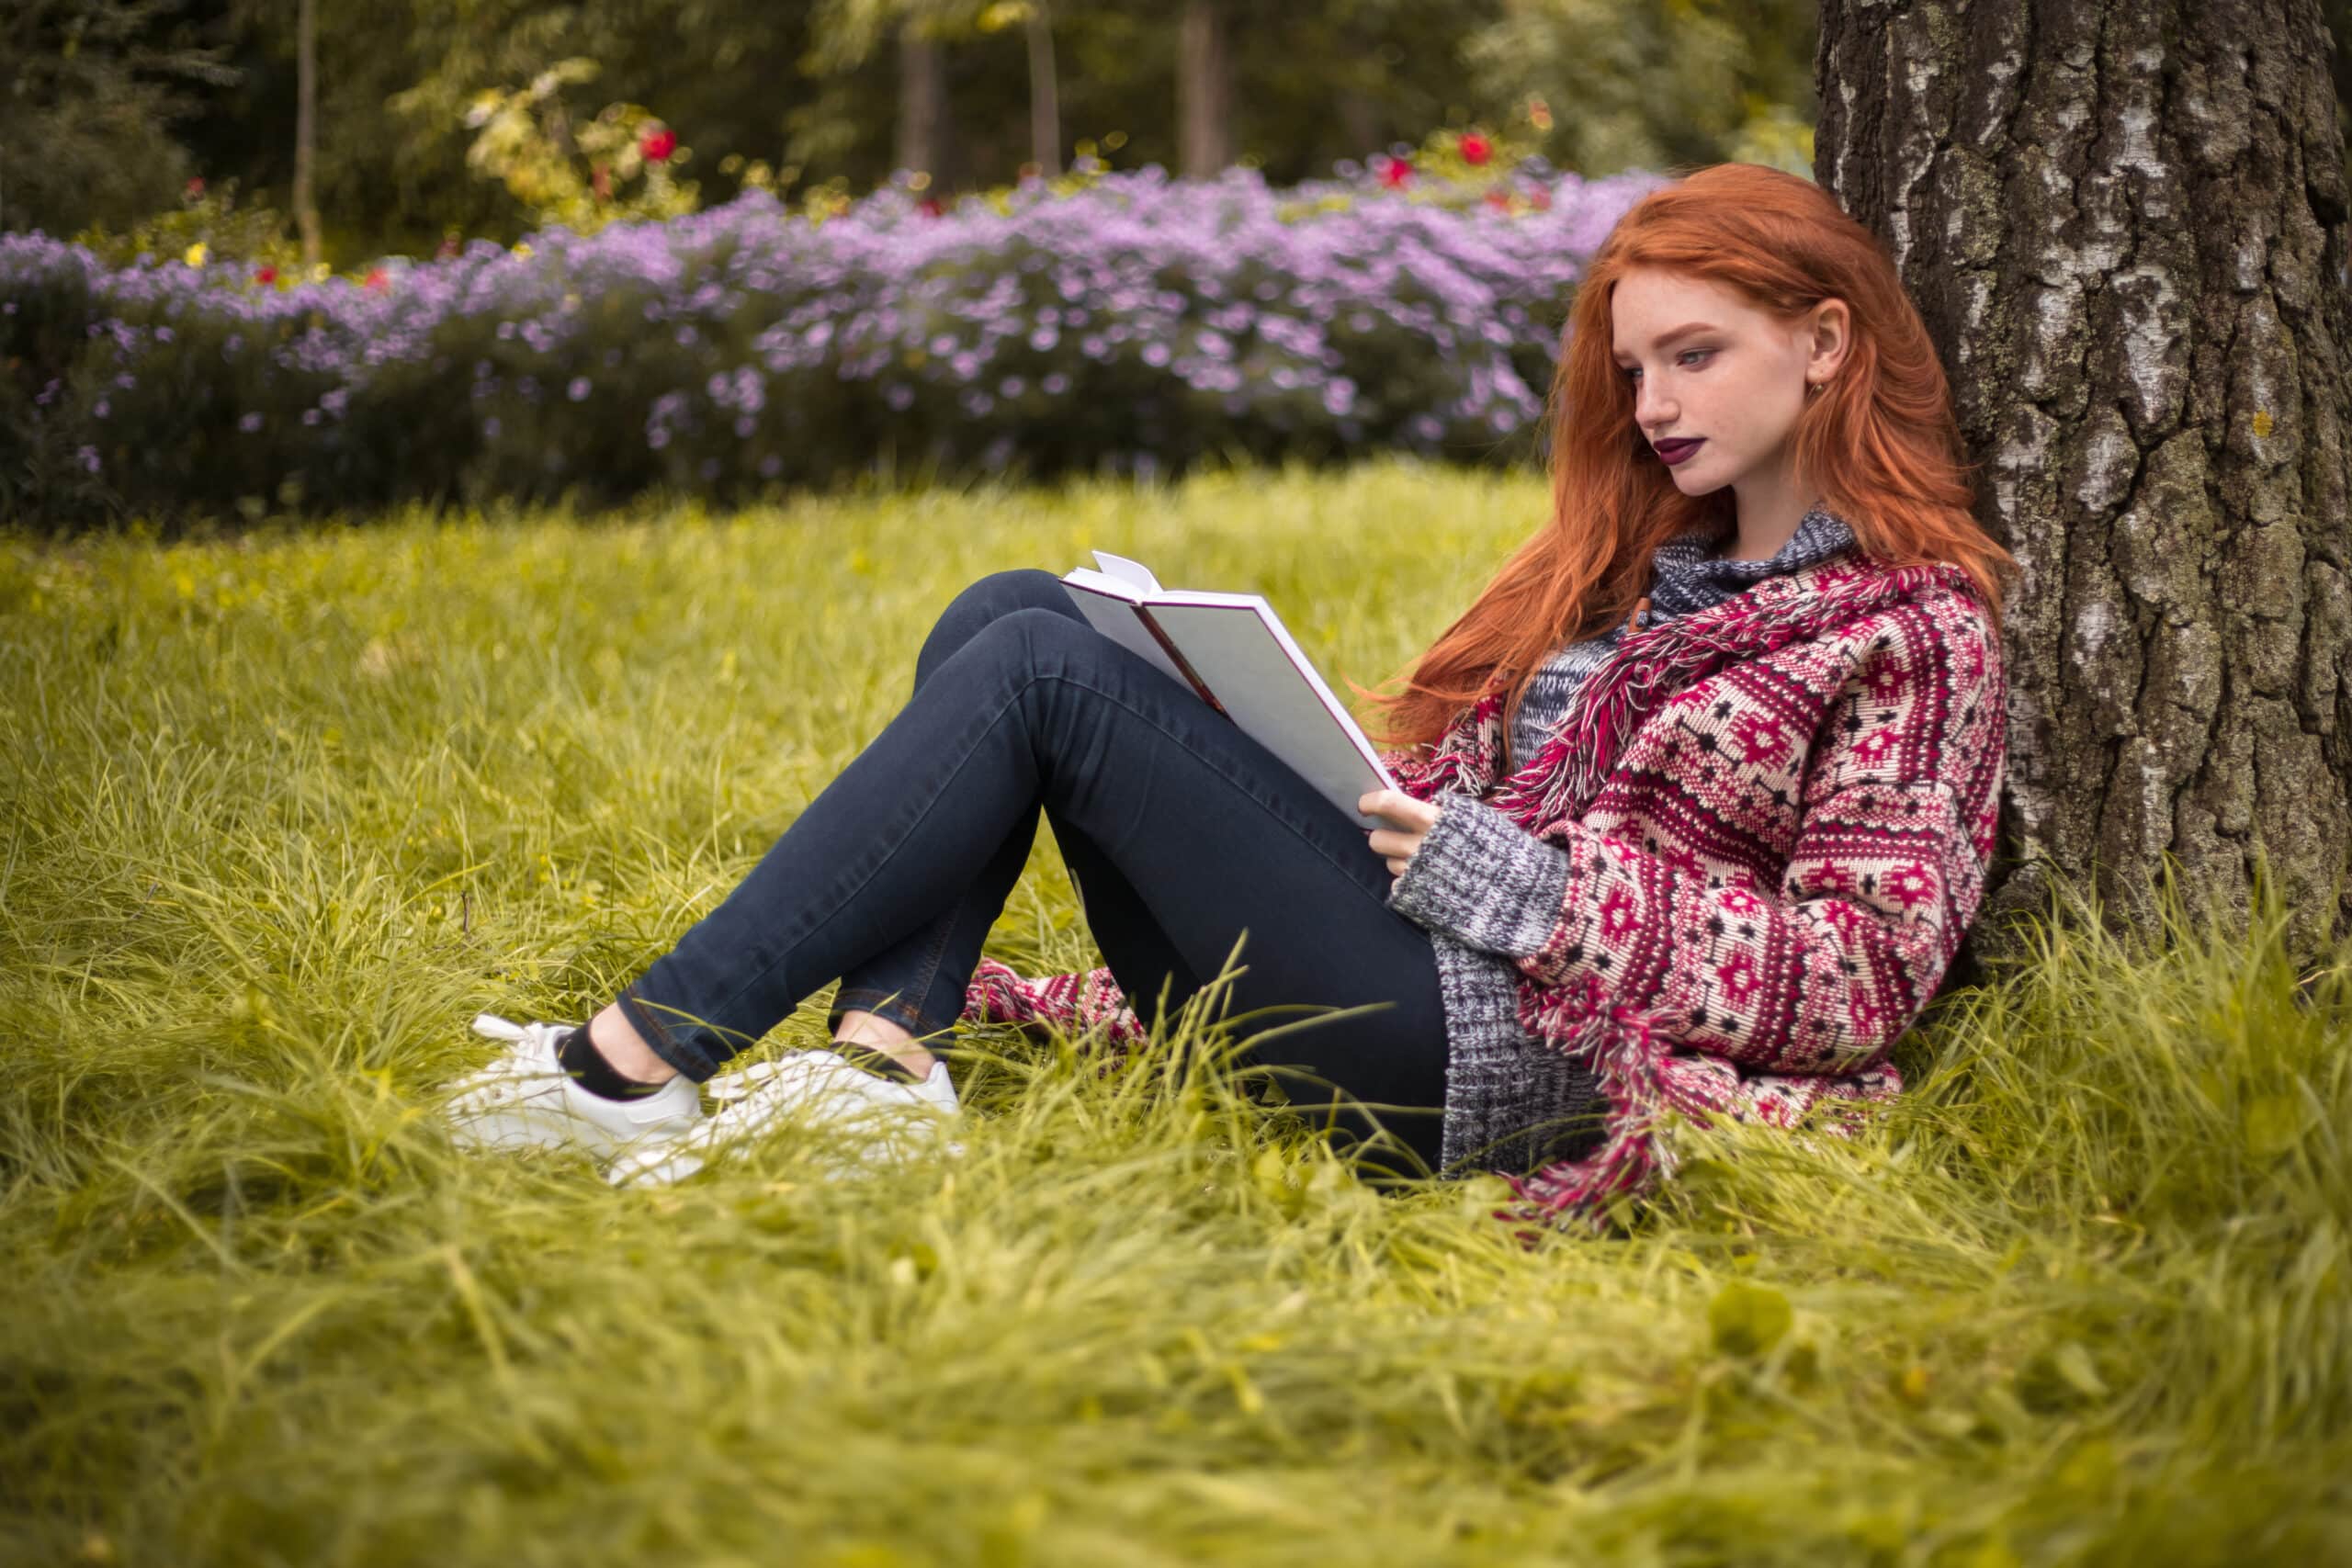 young redhead woman with freckles and dark lipstick reading book outdoors in park under the big tree on grass with flowers.